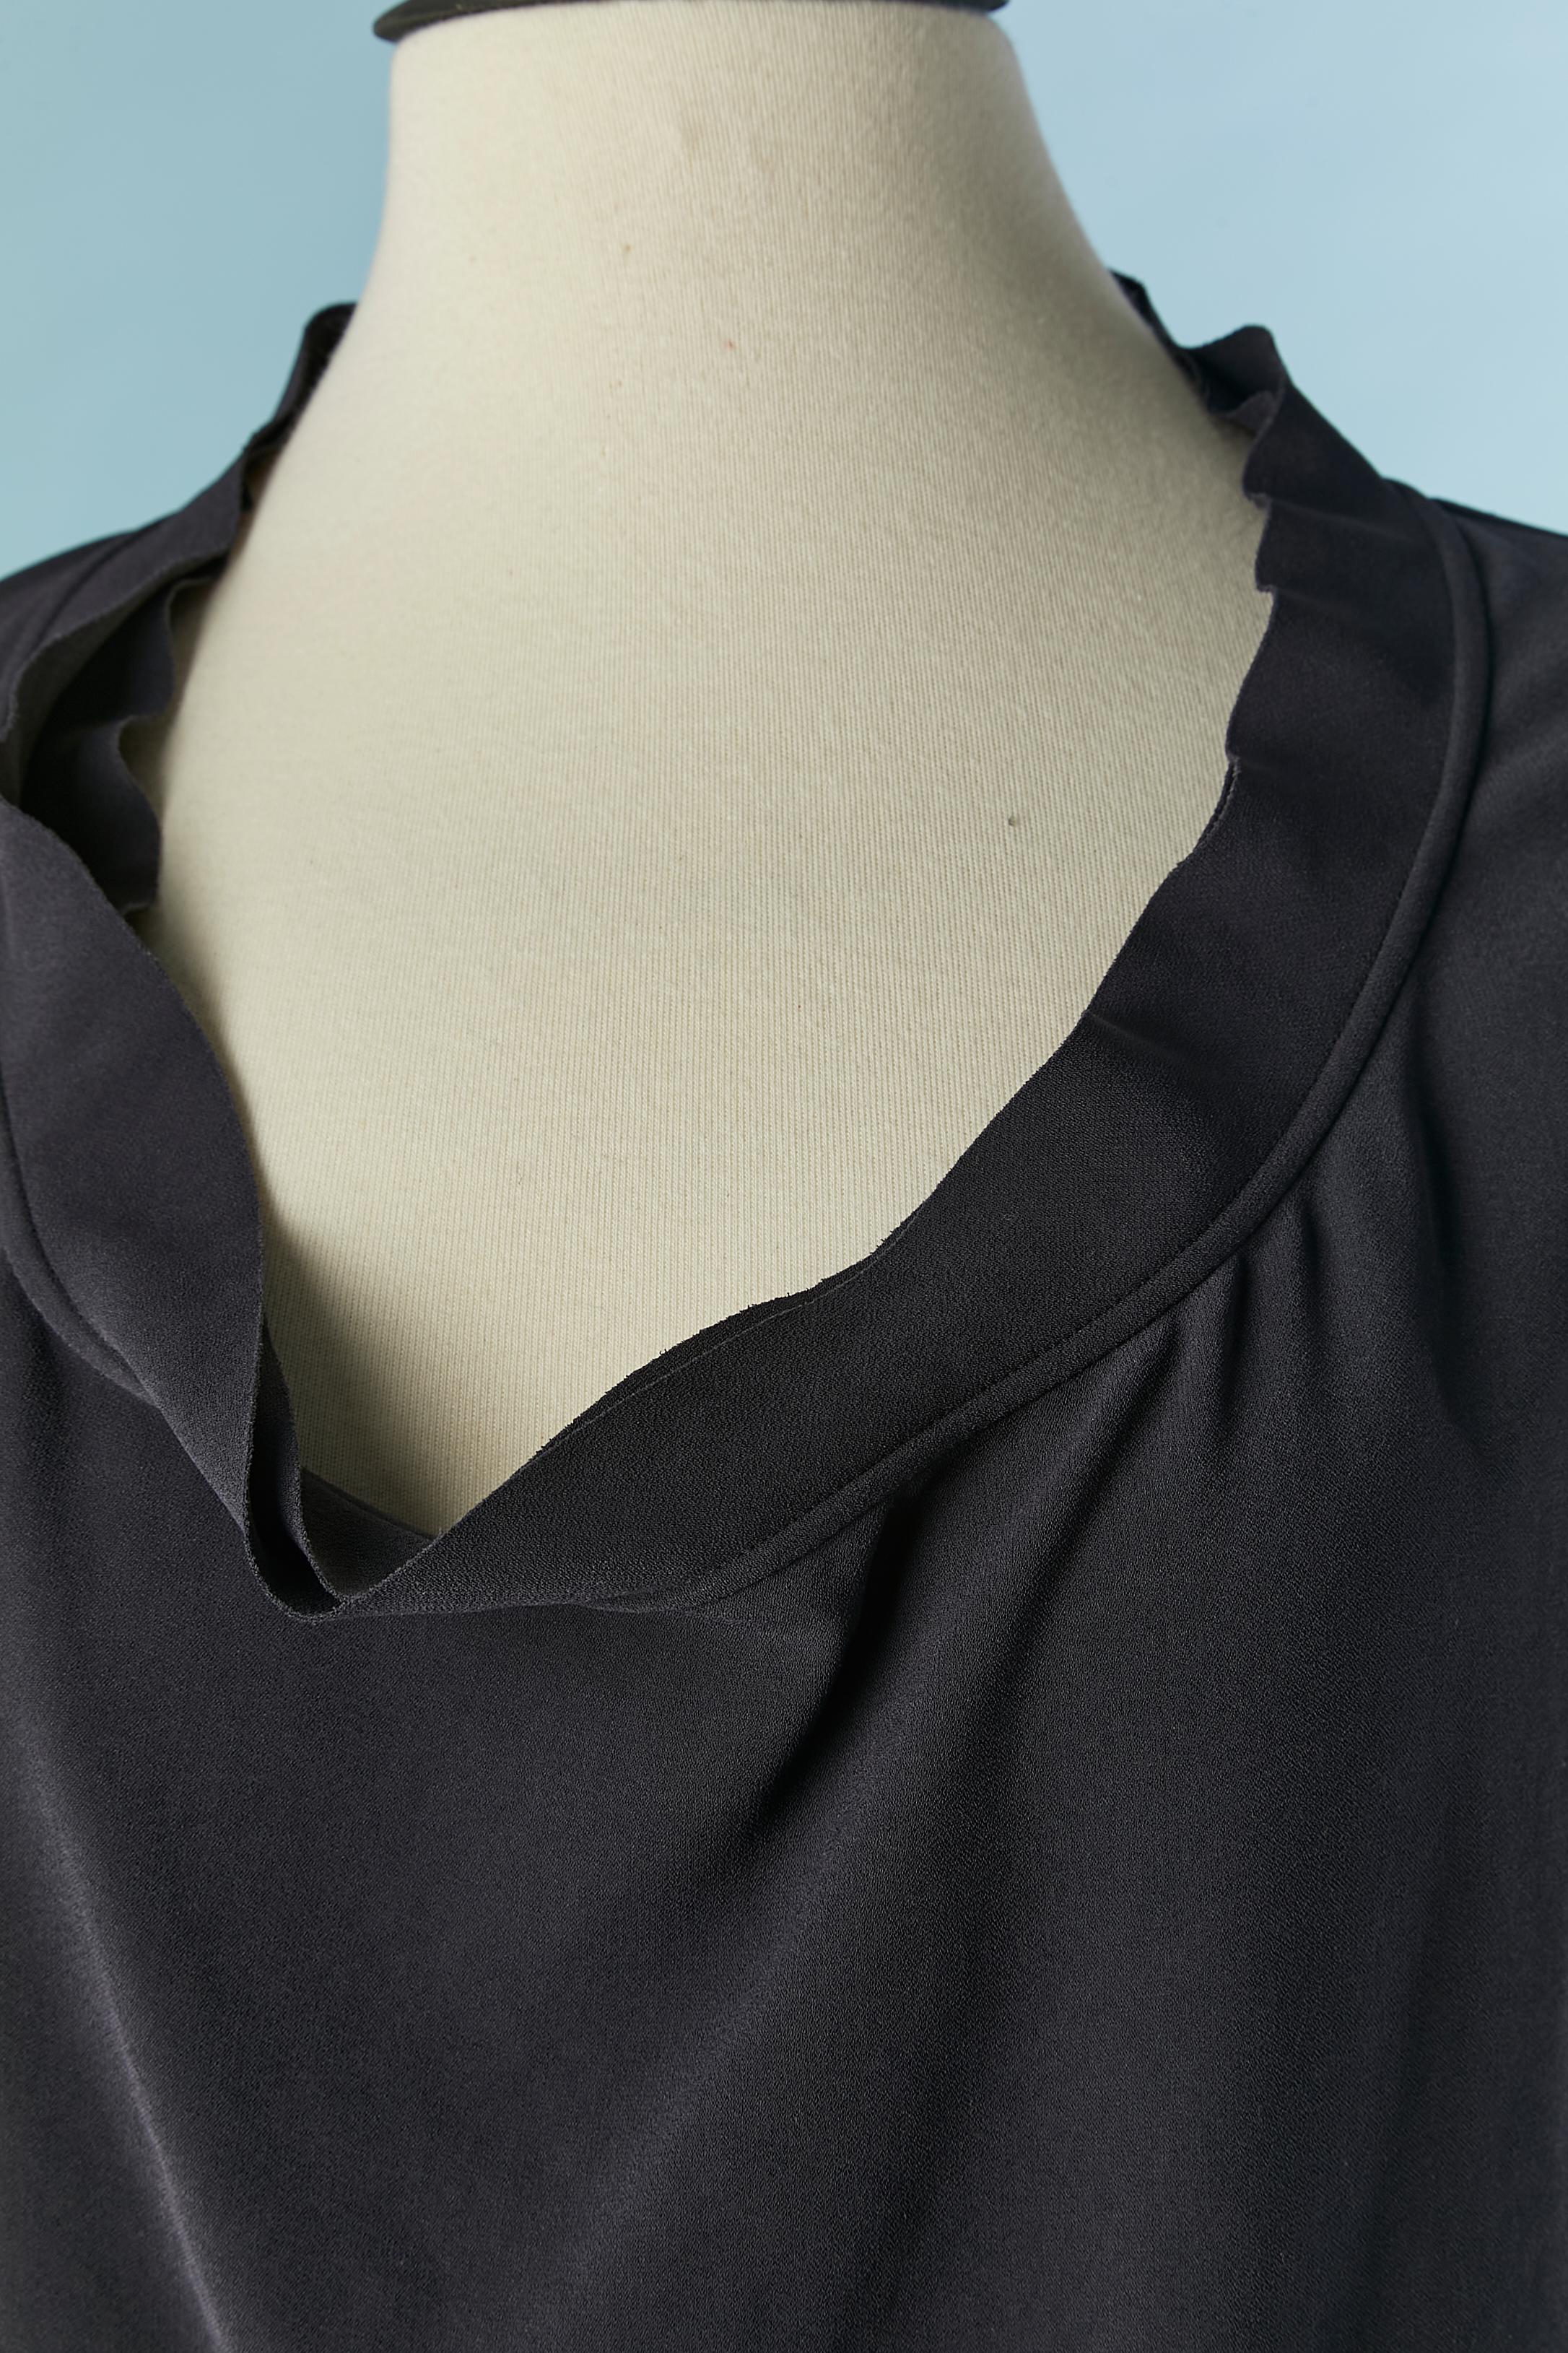 Black sleeveless top with raw cut edge on the arm-hole and neckline and double-lay 
Fabric composition: 60% triacetate, 40% polyester. 
SIZE 42 / L 